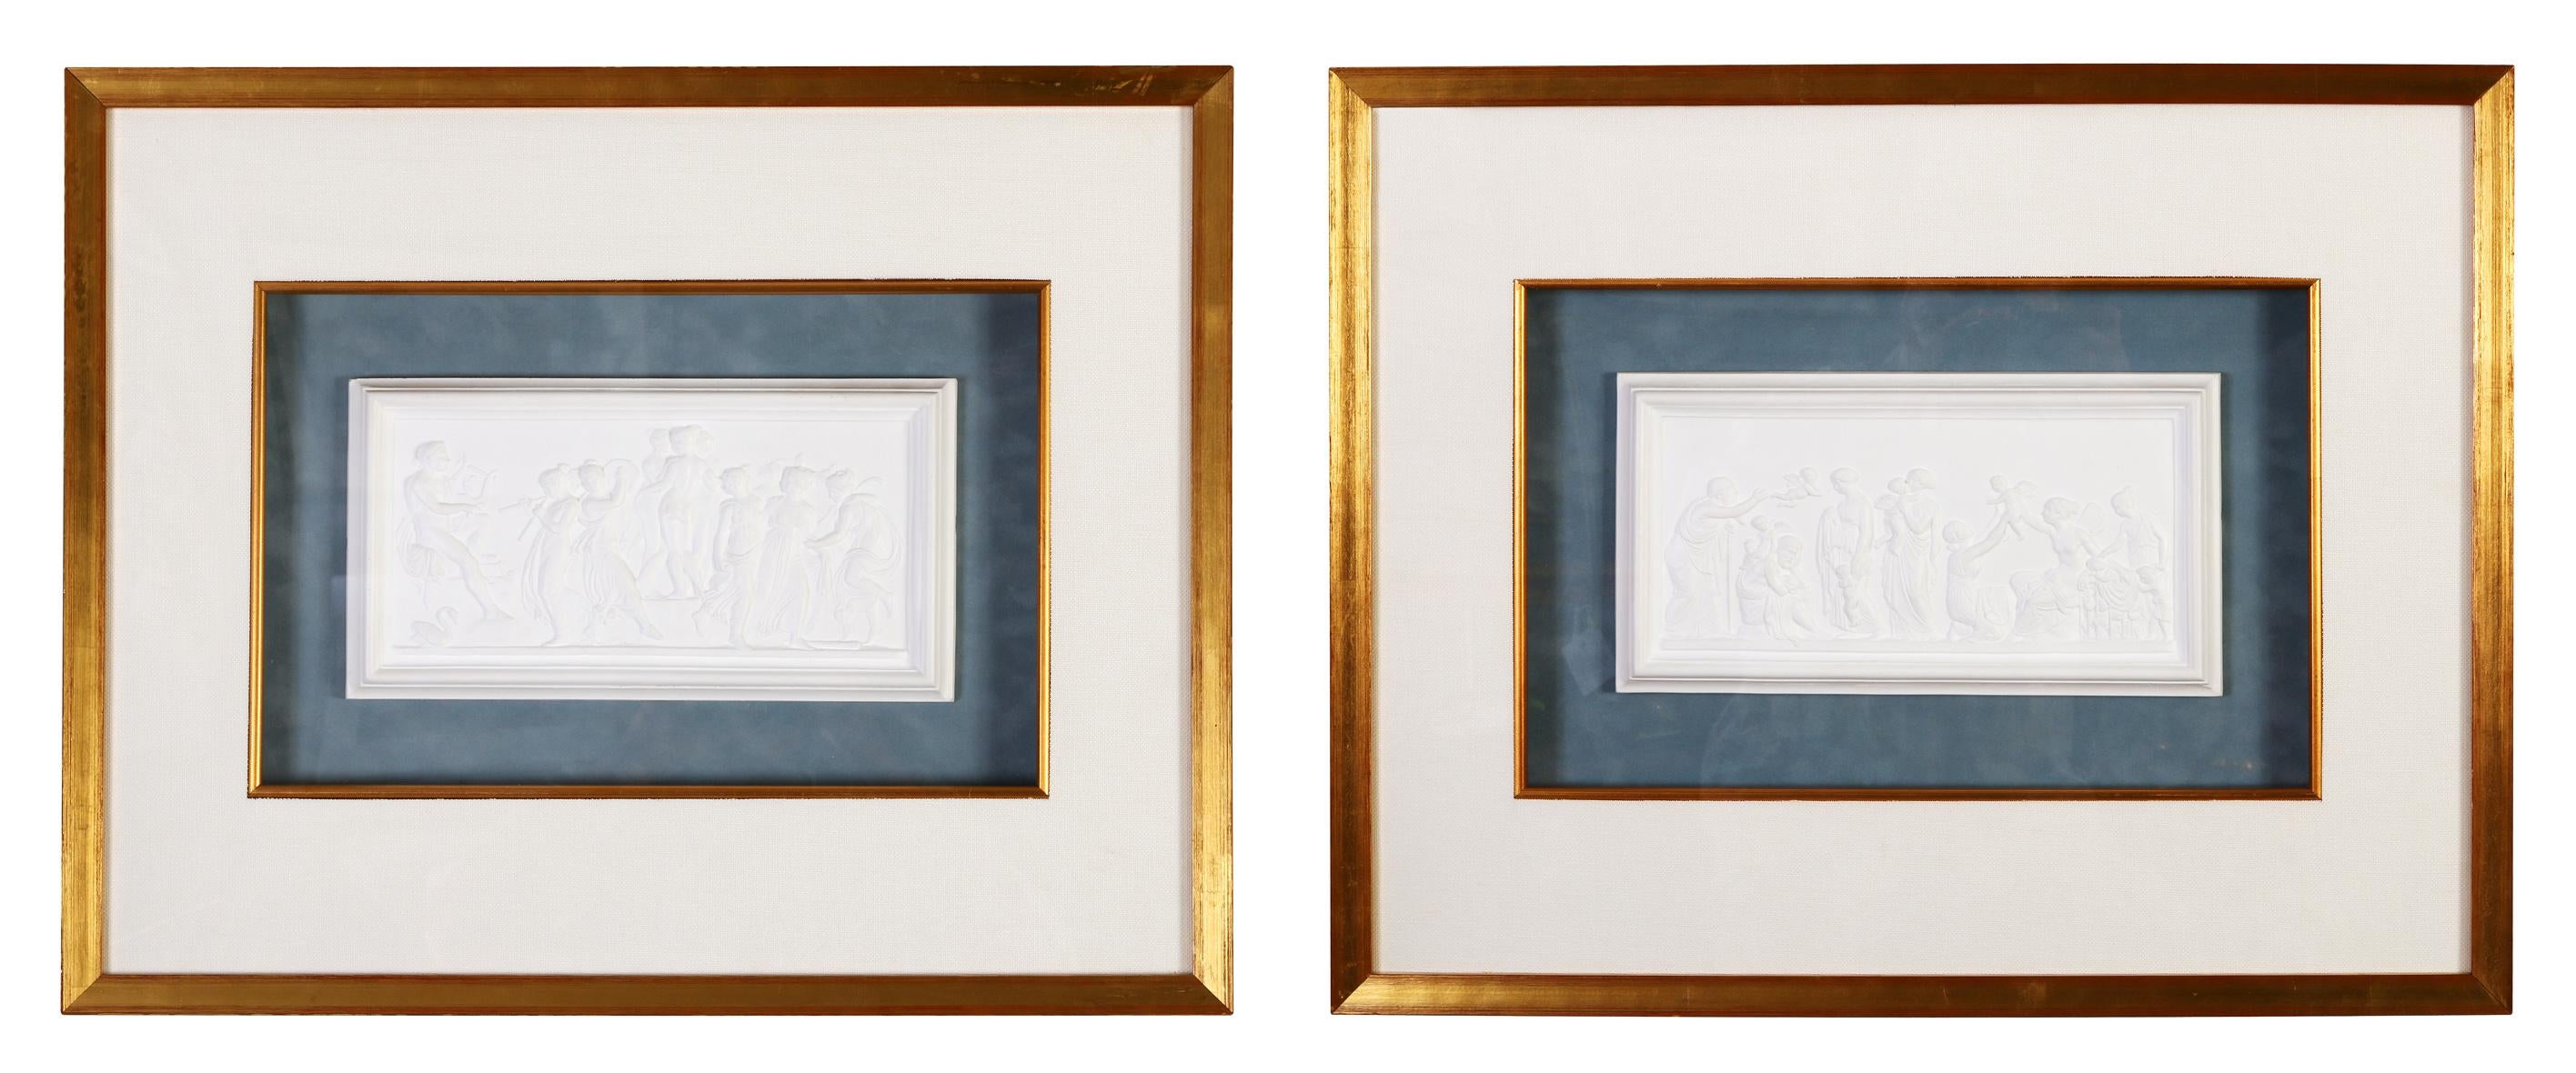 Framed Porcelain Friezes In Excellent Condition For Sale In New York, NY